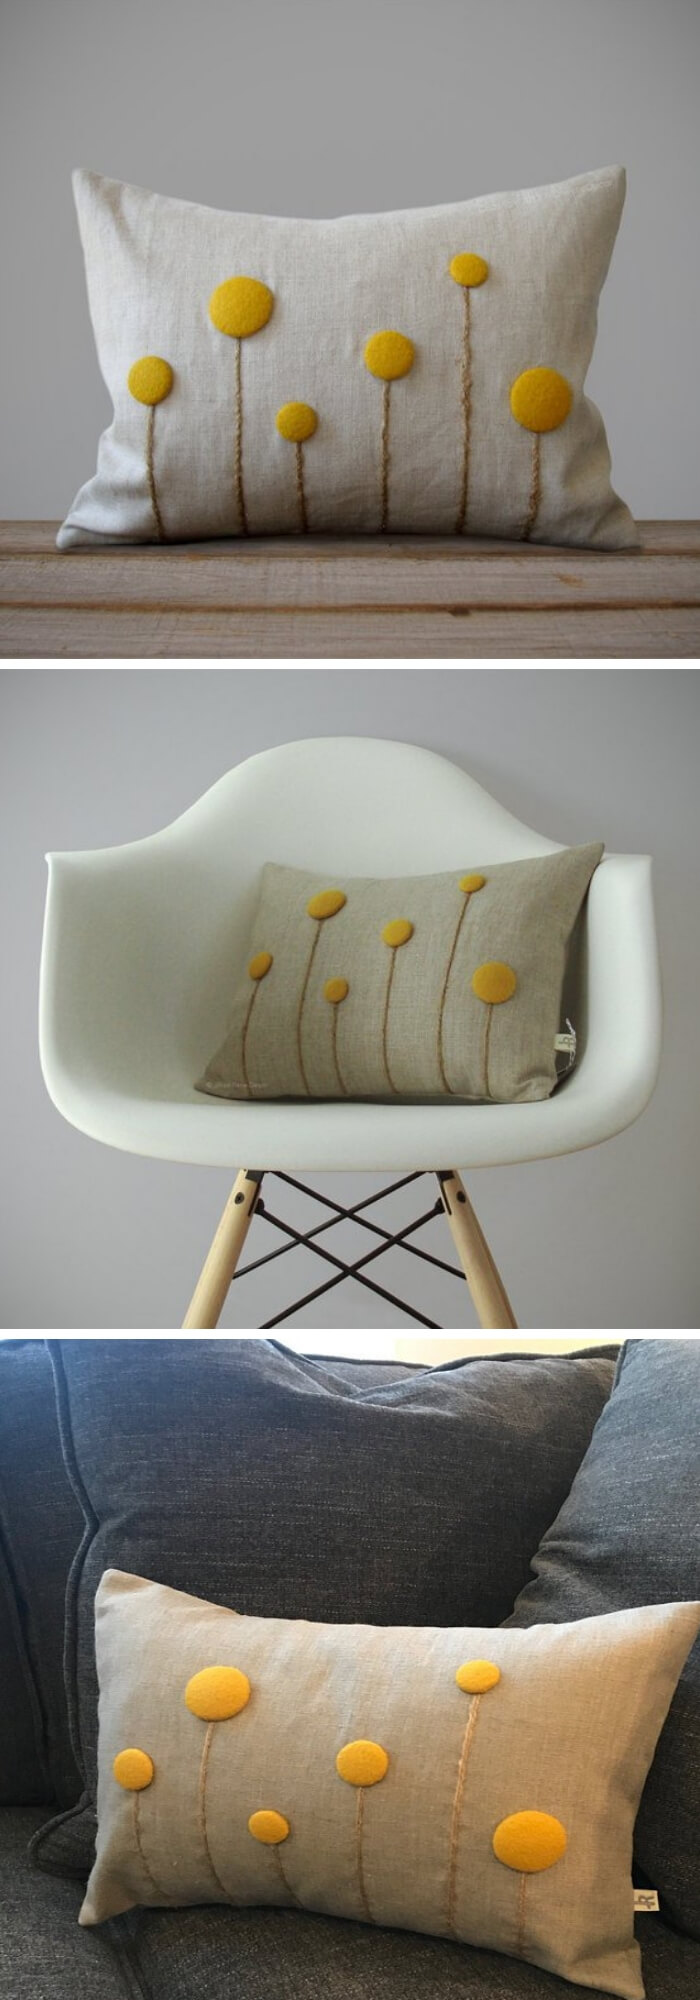 Home Decorating Ideas With Flowers: Yellow Billy Ball Flower Pillow in Natural Linen